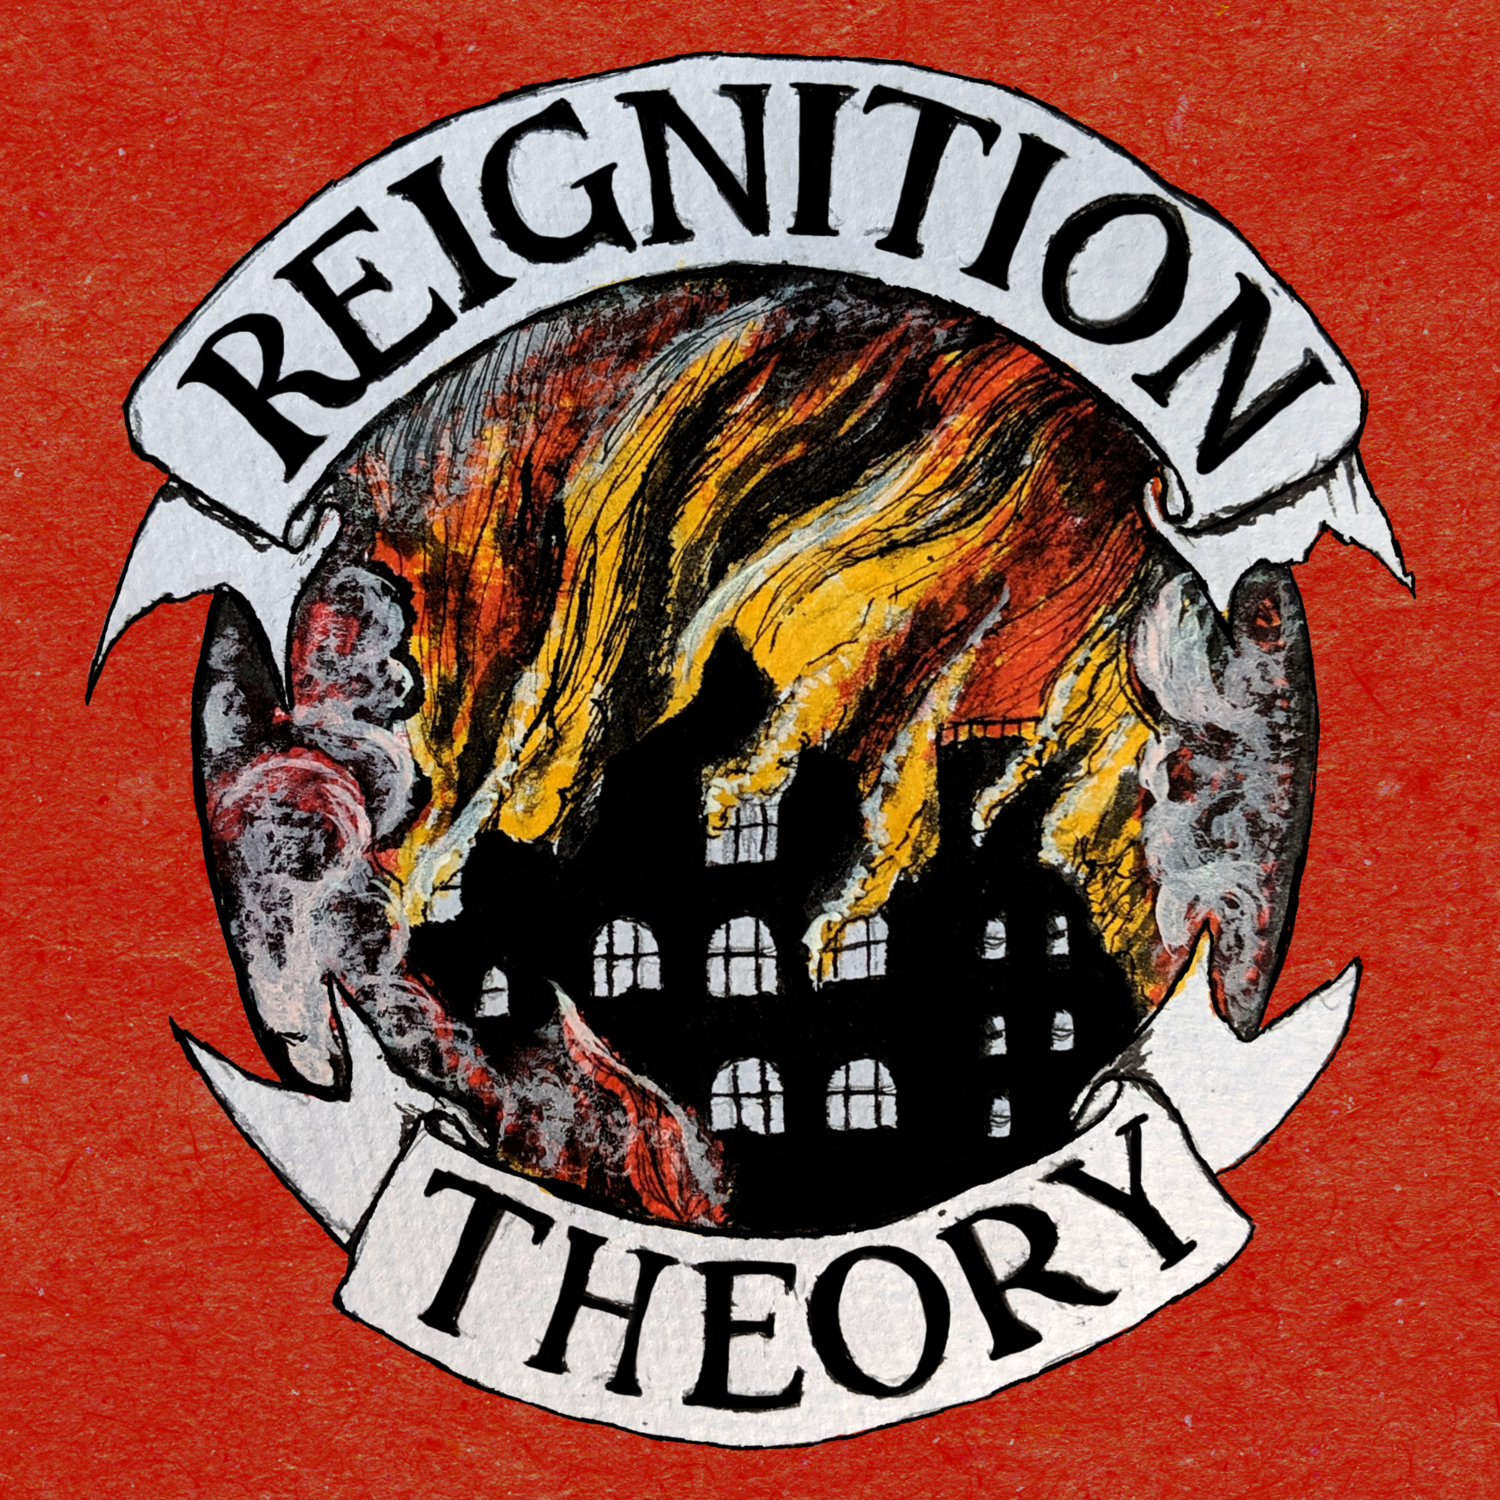 Episode 10 - War - The Reignition Theory